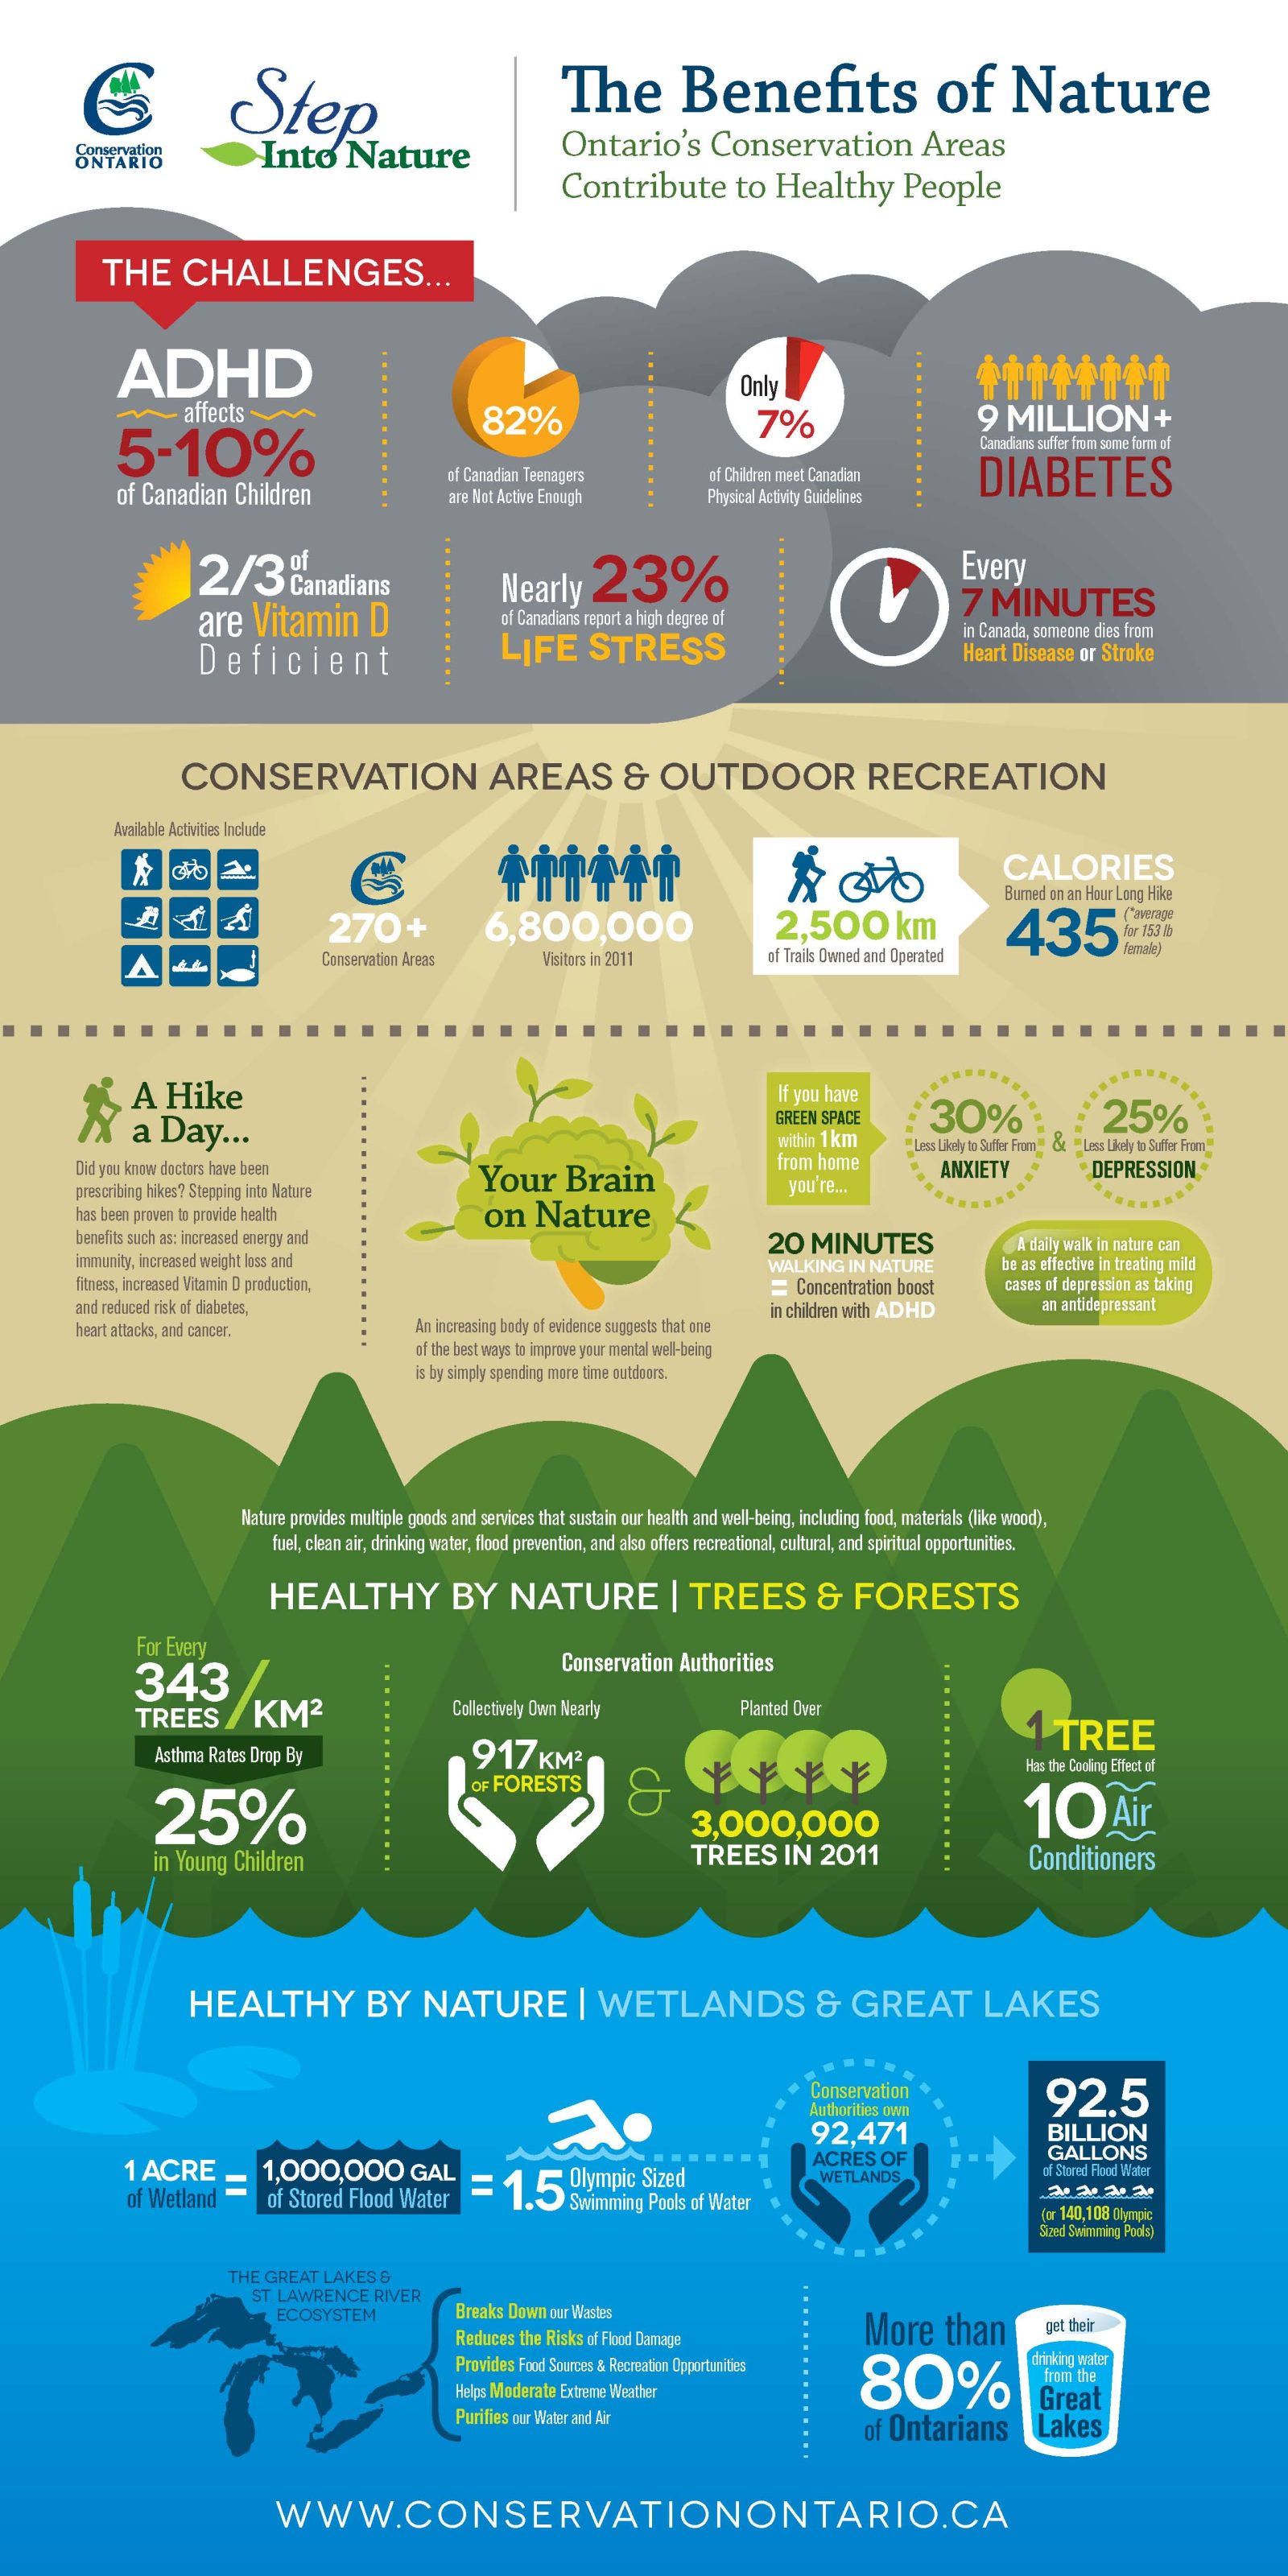 The Benefits of Nature: Ontario’s Conservation Authorities Contribute to Healthy People